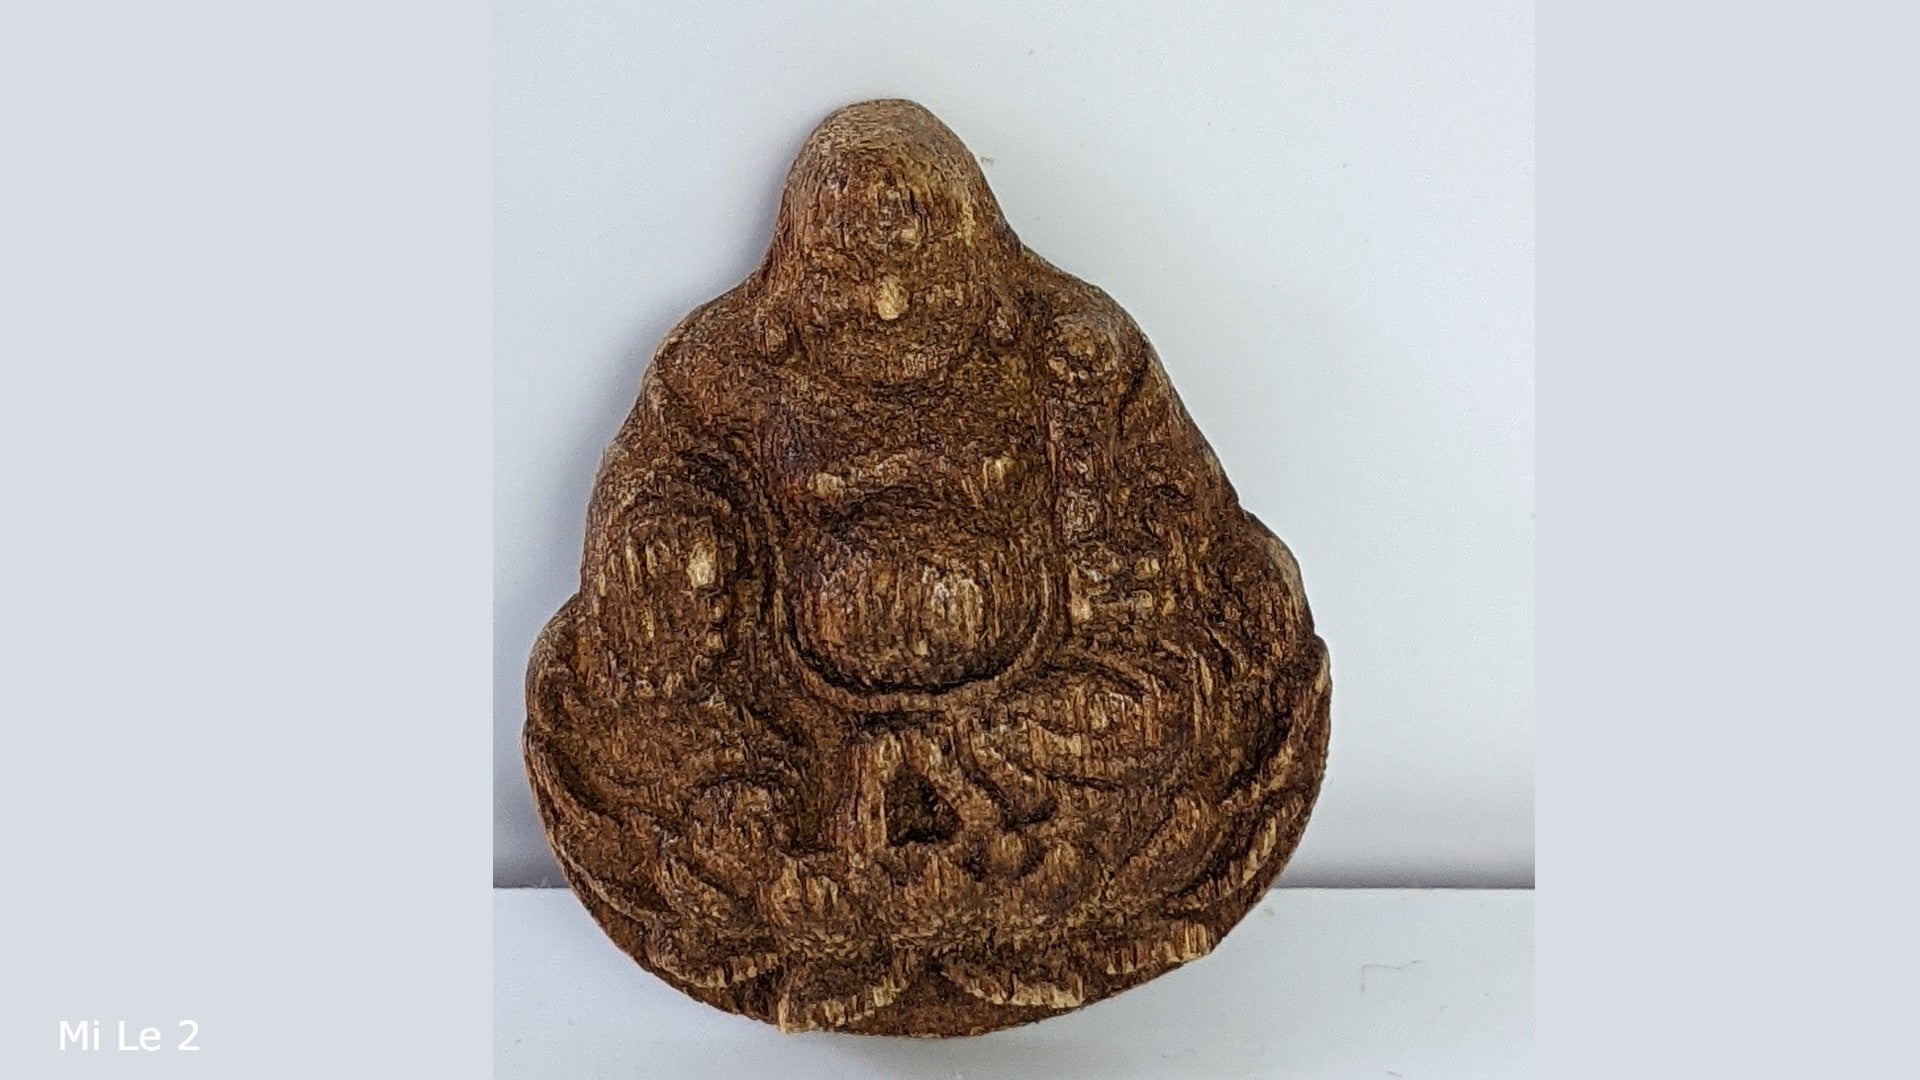 Cultivated Agarwood Pendant Guan Yin The Goddess of Mercy and Mi Le Laughing Buddha - Mi Le 2 w 2.9g